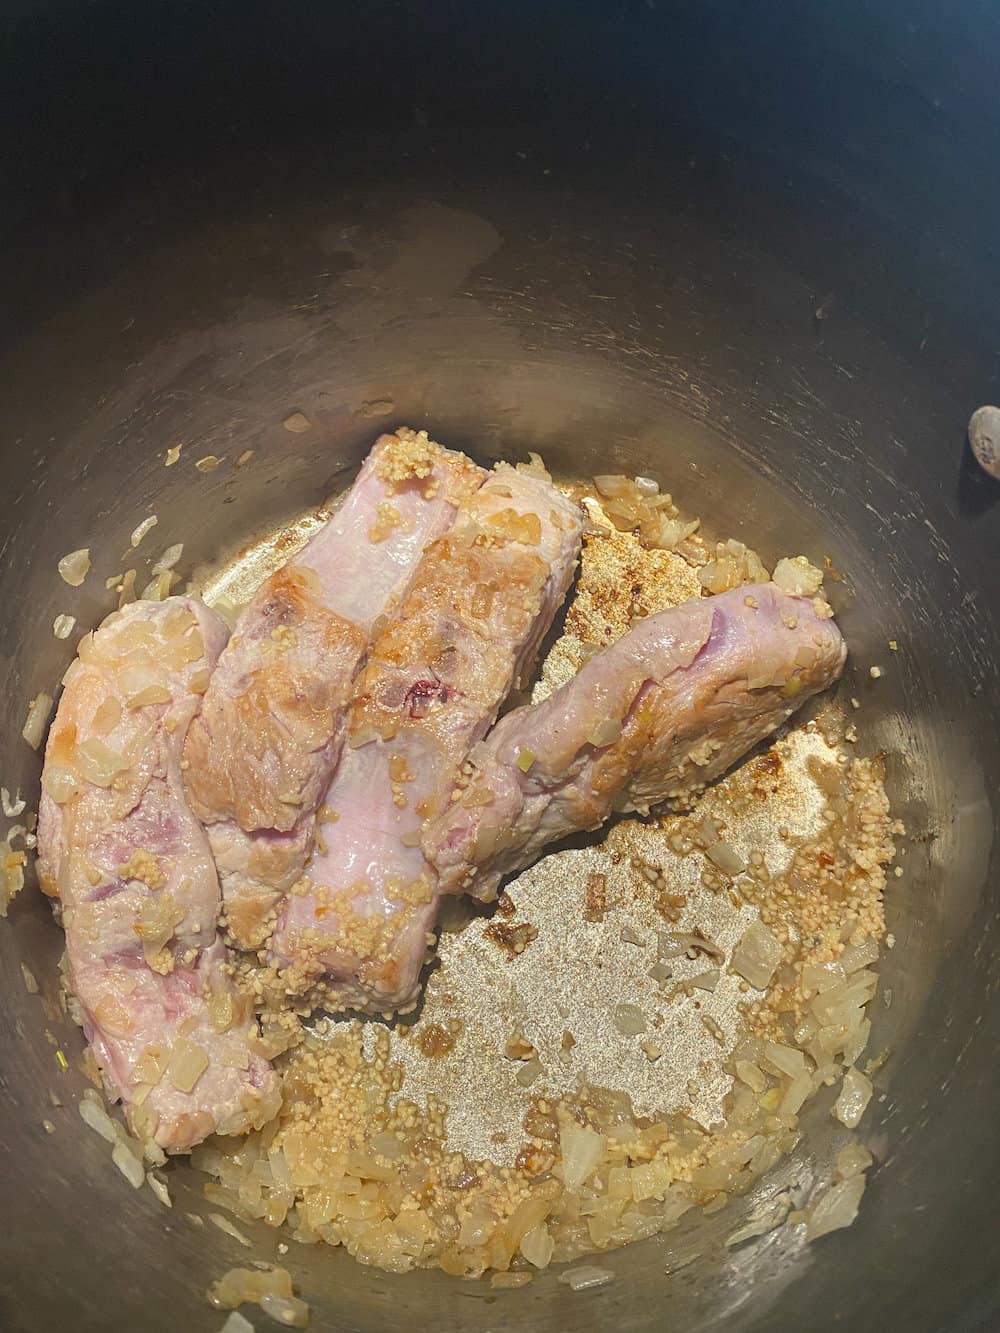 browned pork bones with onions for flavor of the traditional Italian pasta sauce